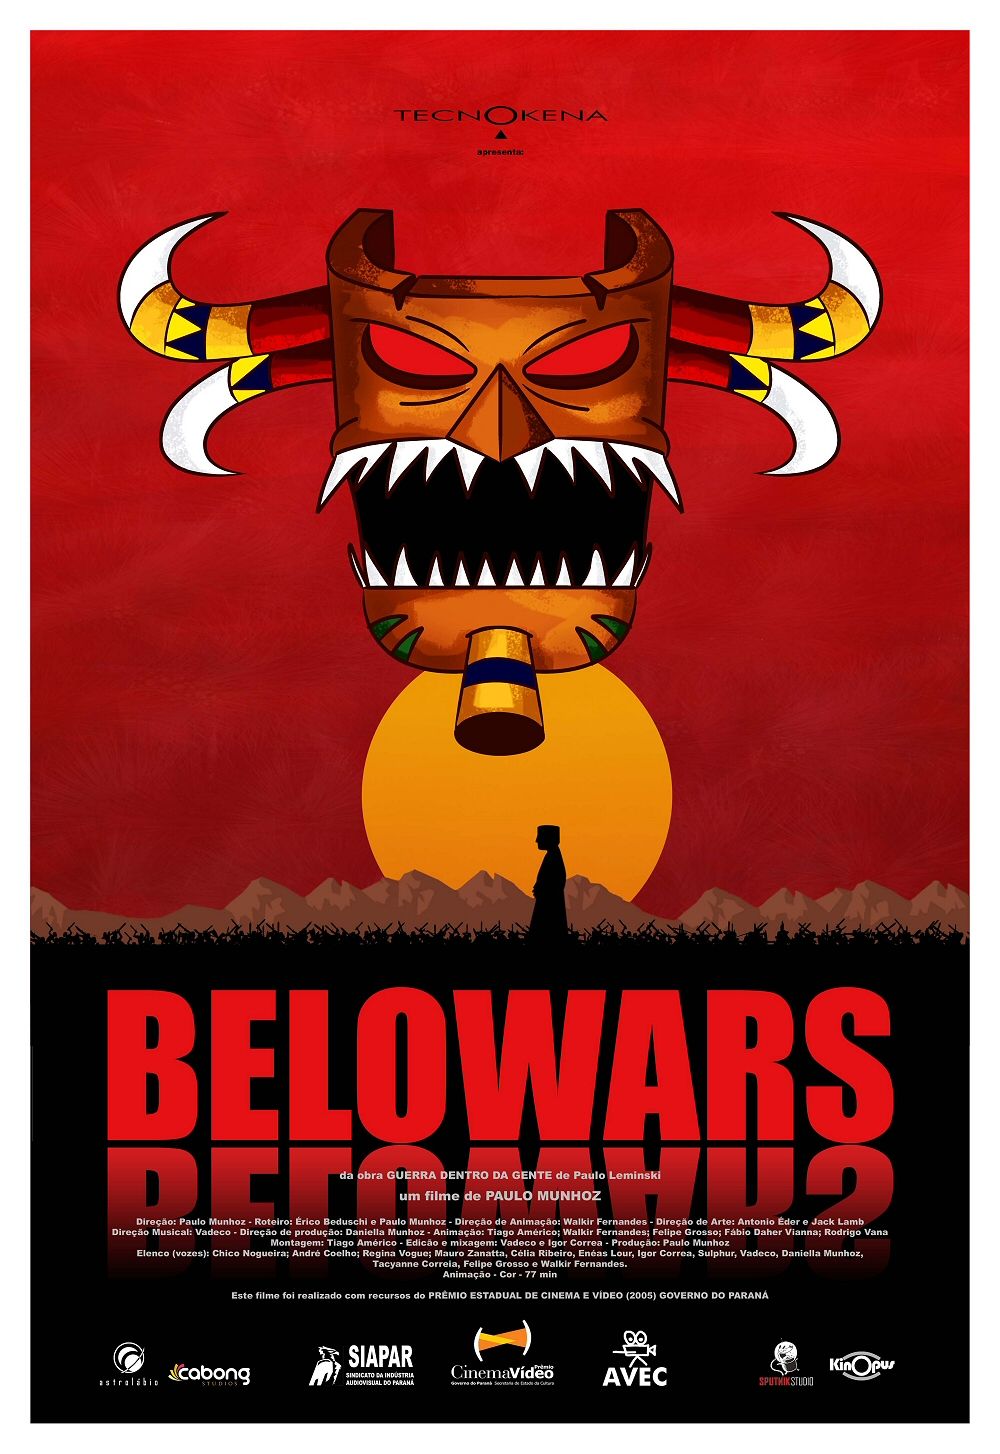 Extra Large Movie Poster Image for Belowars 